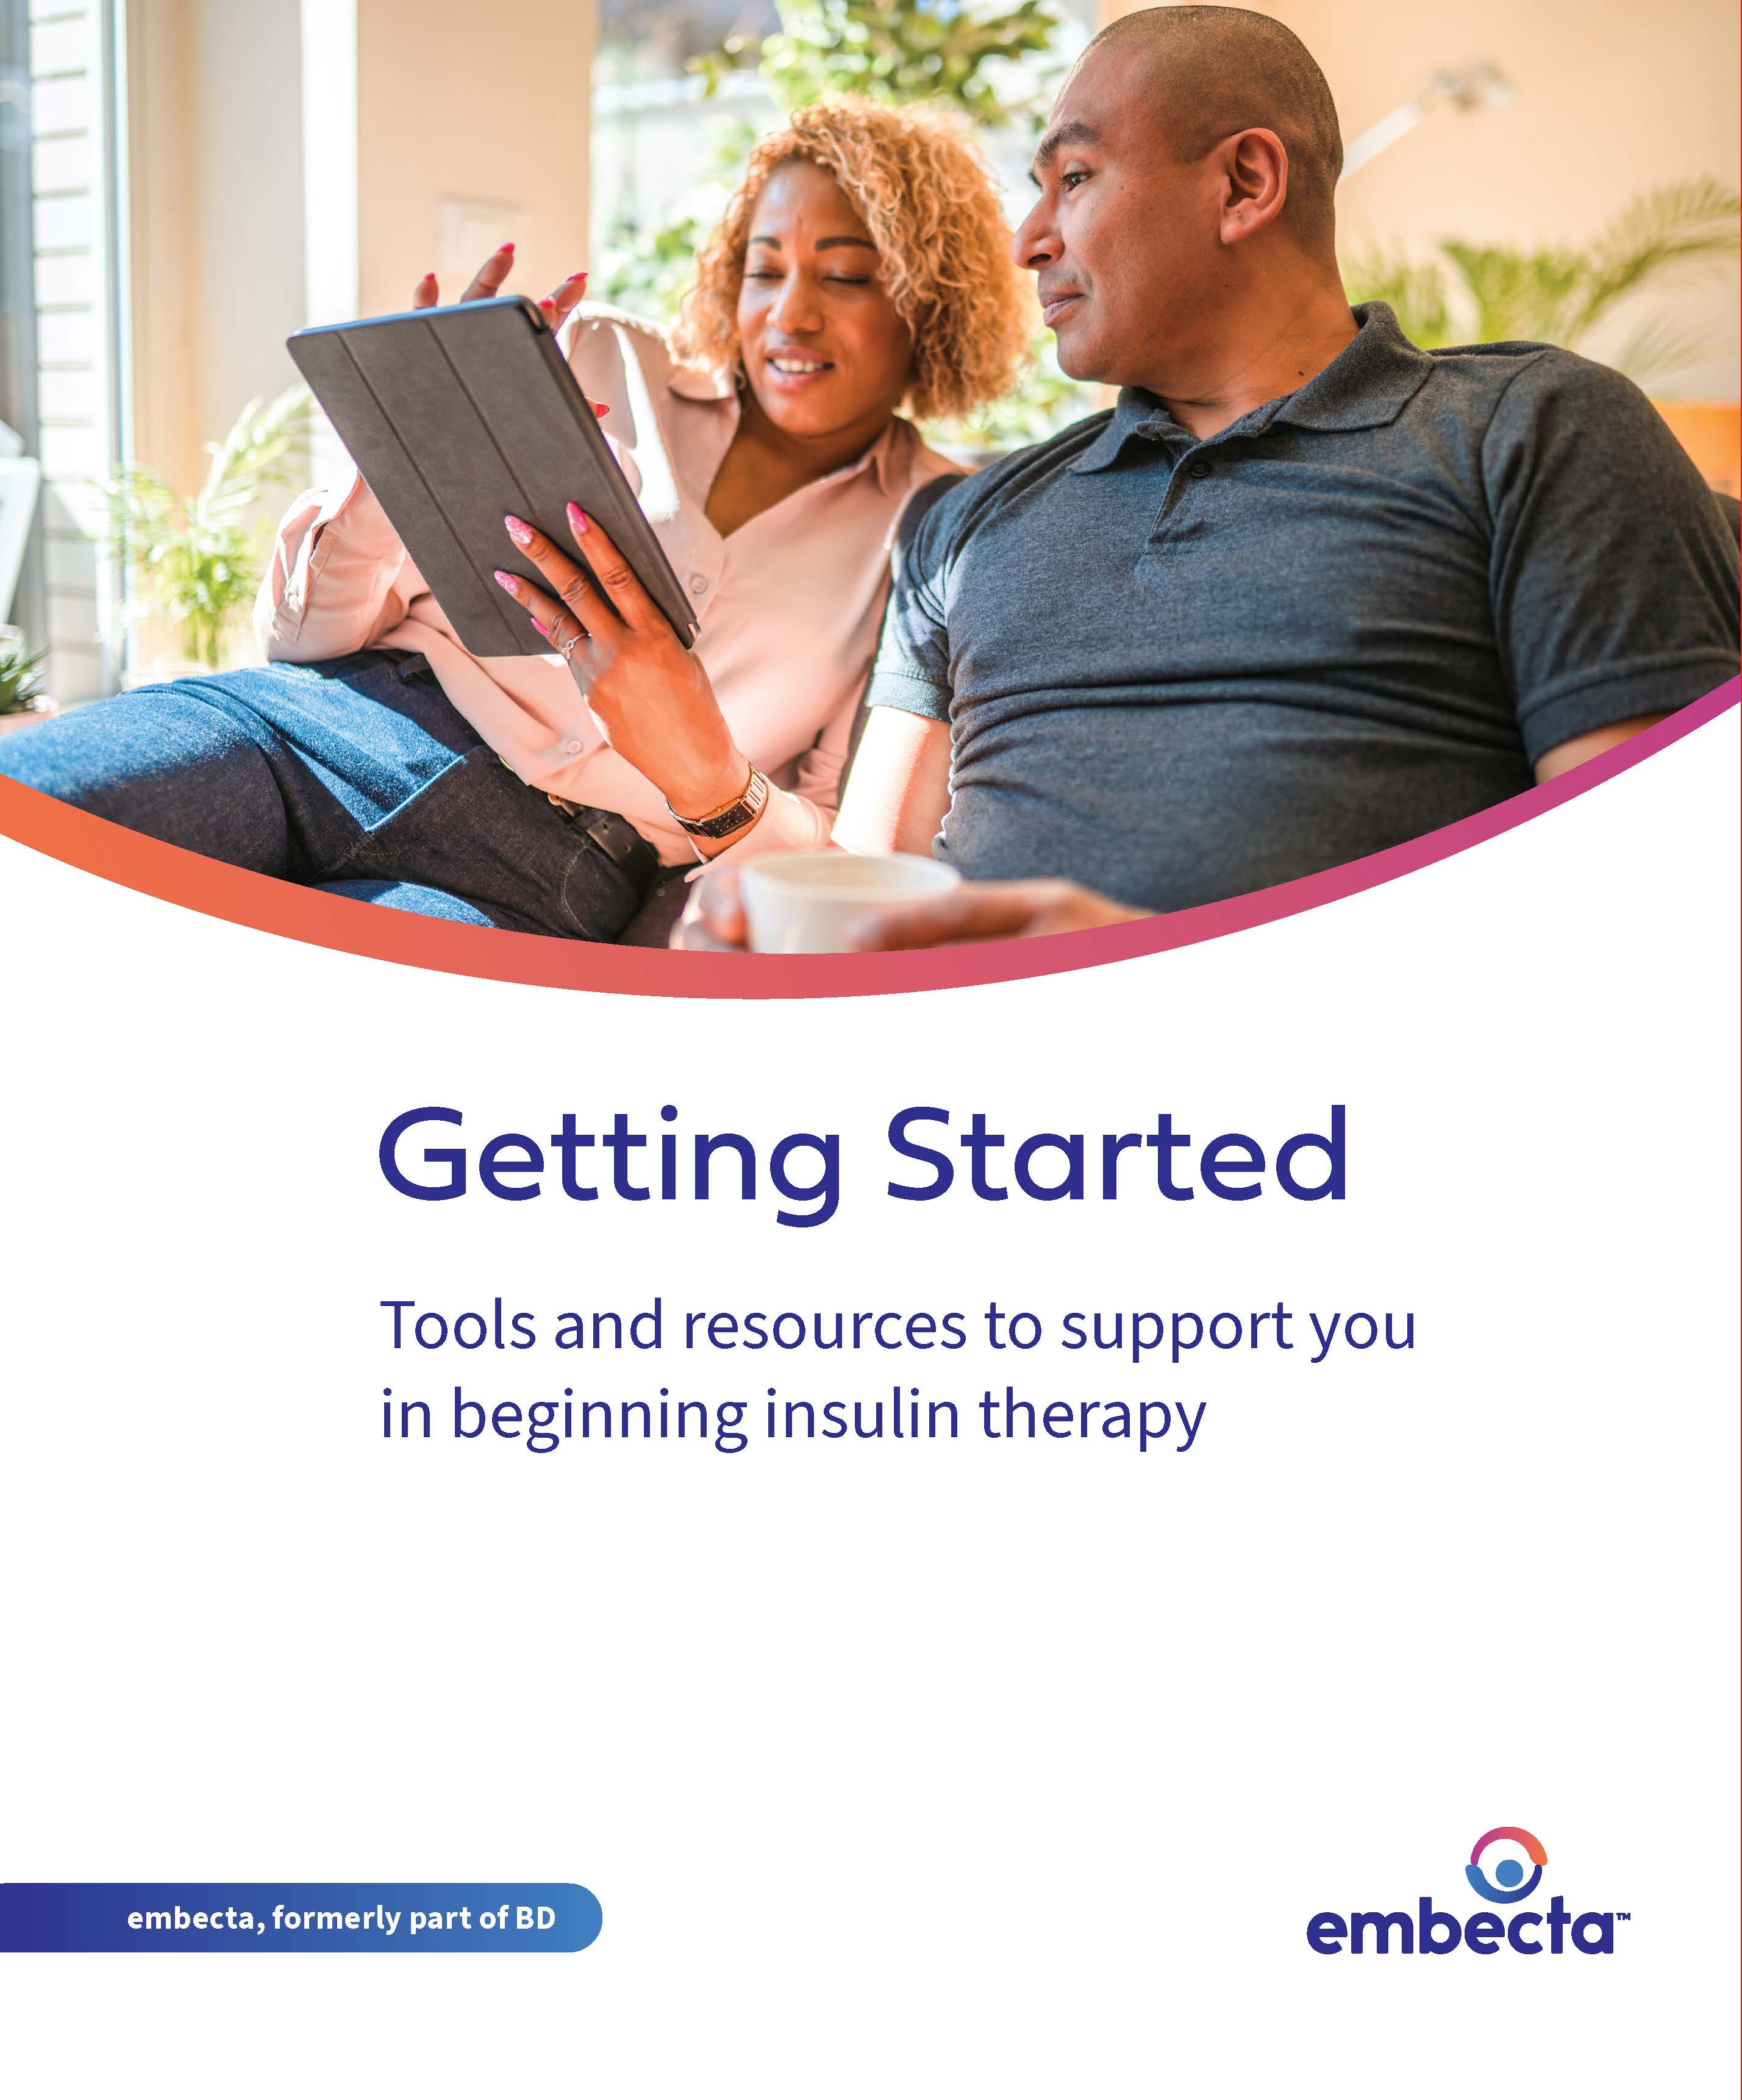 Getting Started™ patient booklet